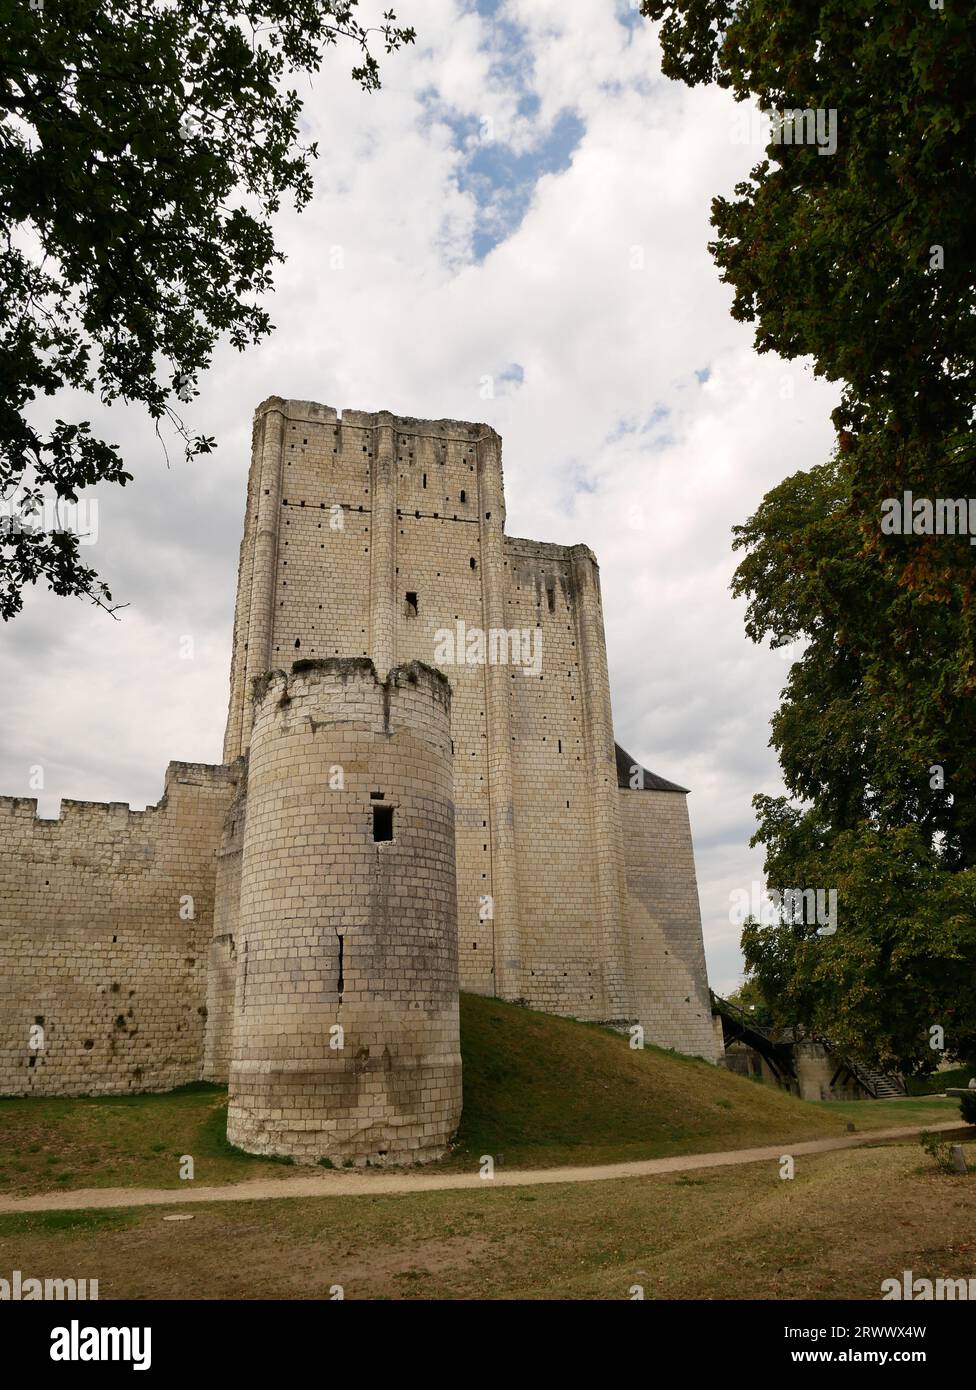 Castle and Dungeon, Loches, Indre-et-Loire, Frankreich Stockfoto